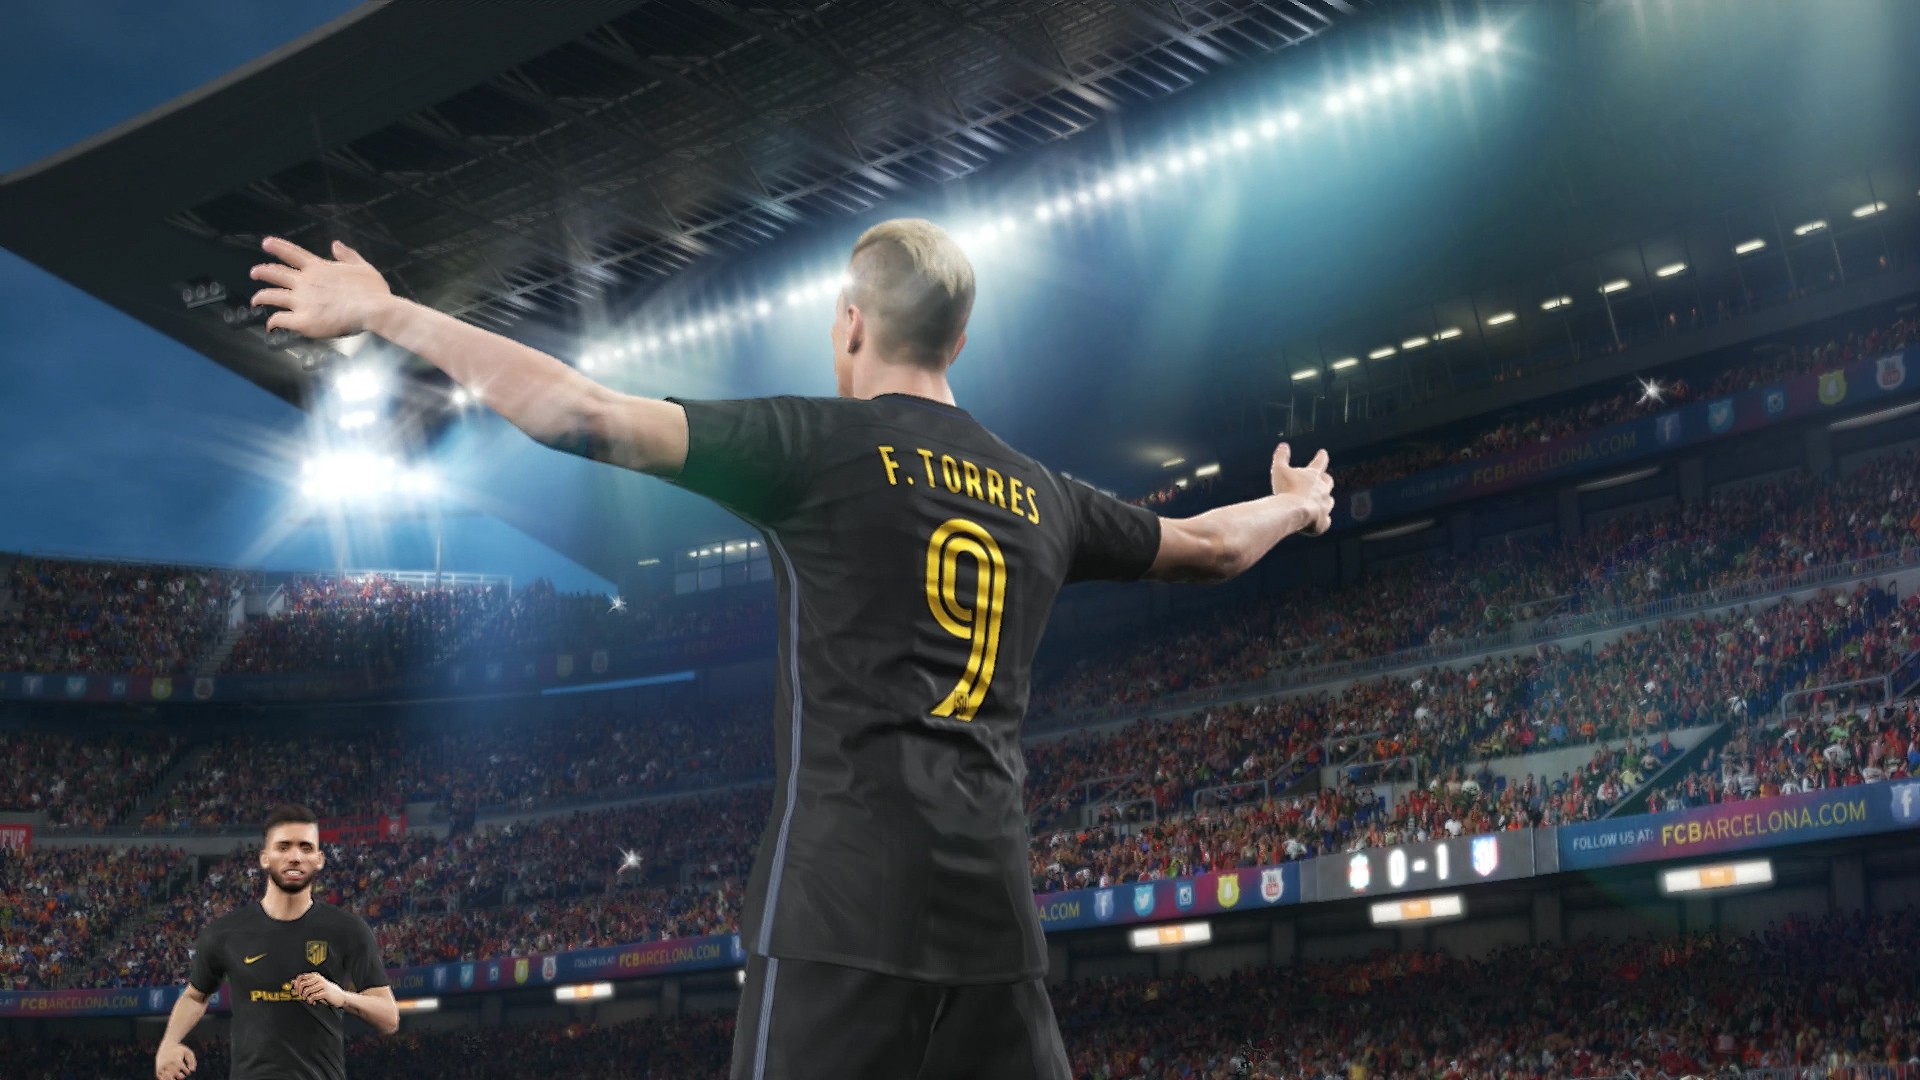 PES 2018 Review - Worth Buying Over FIFA?